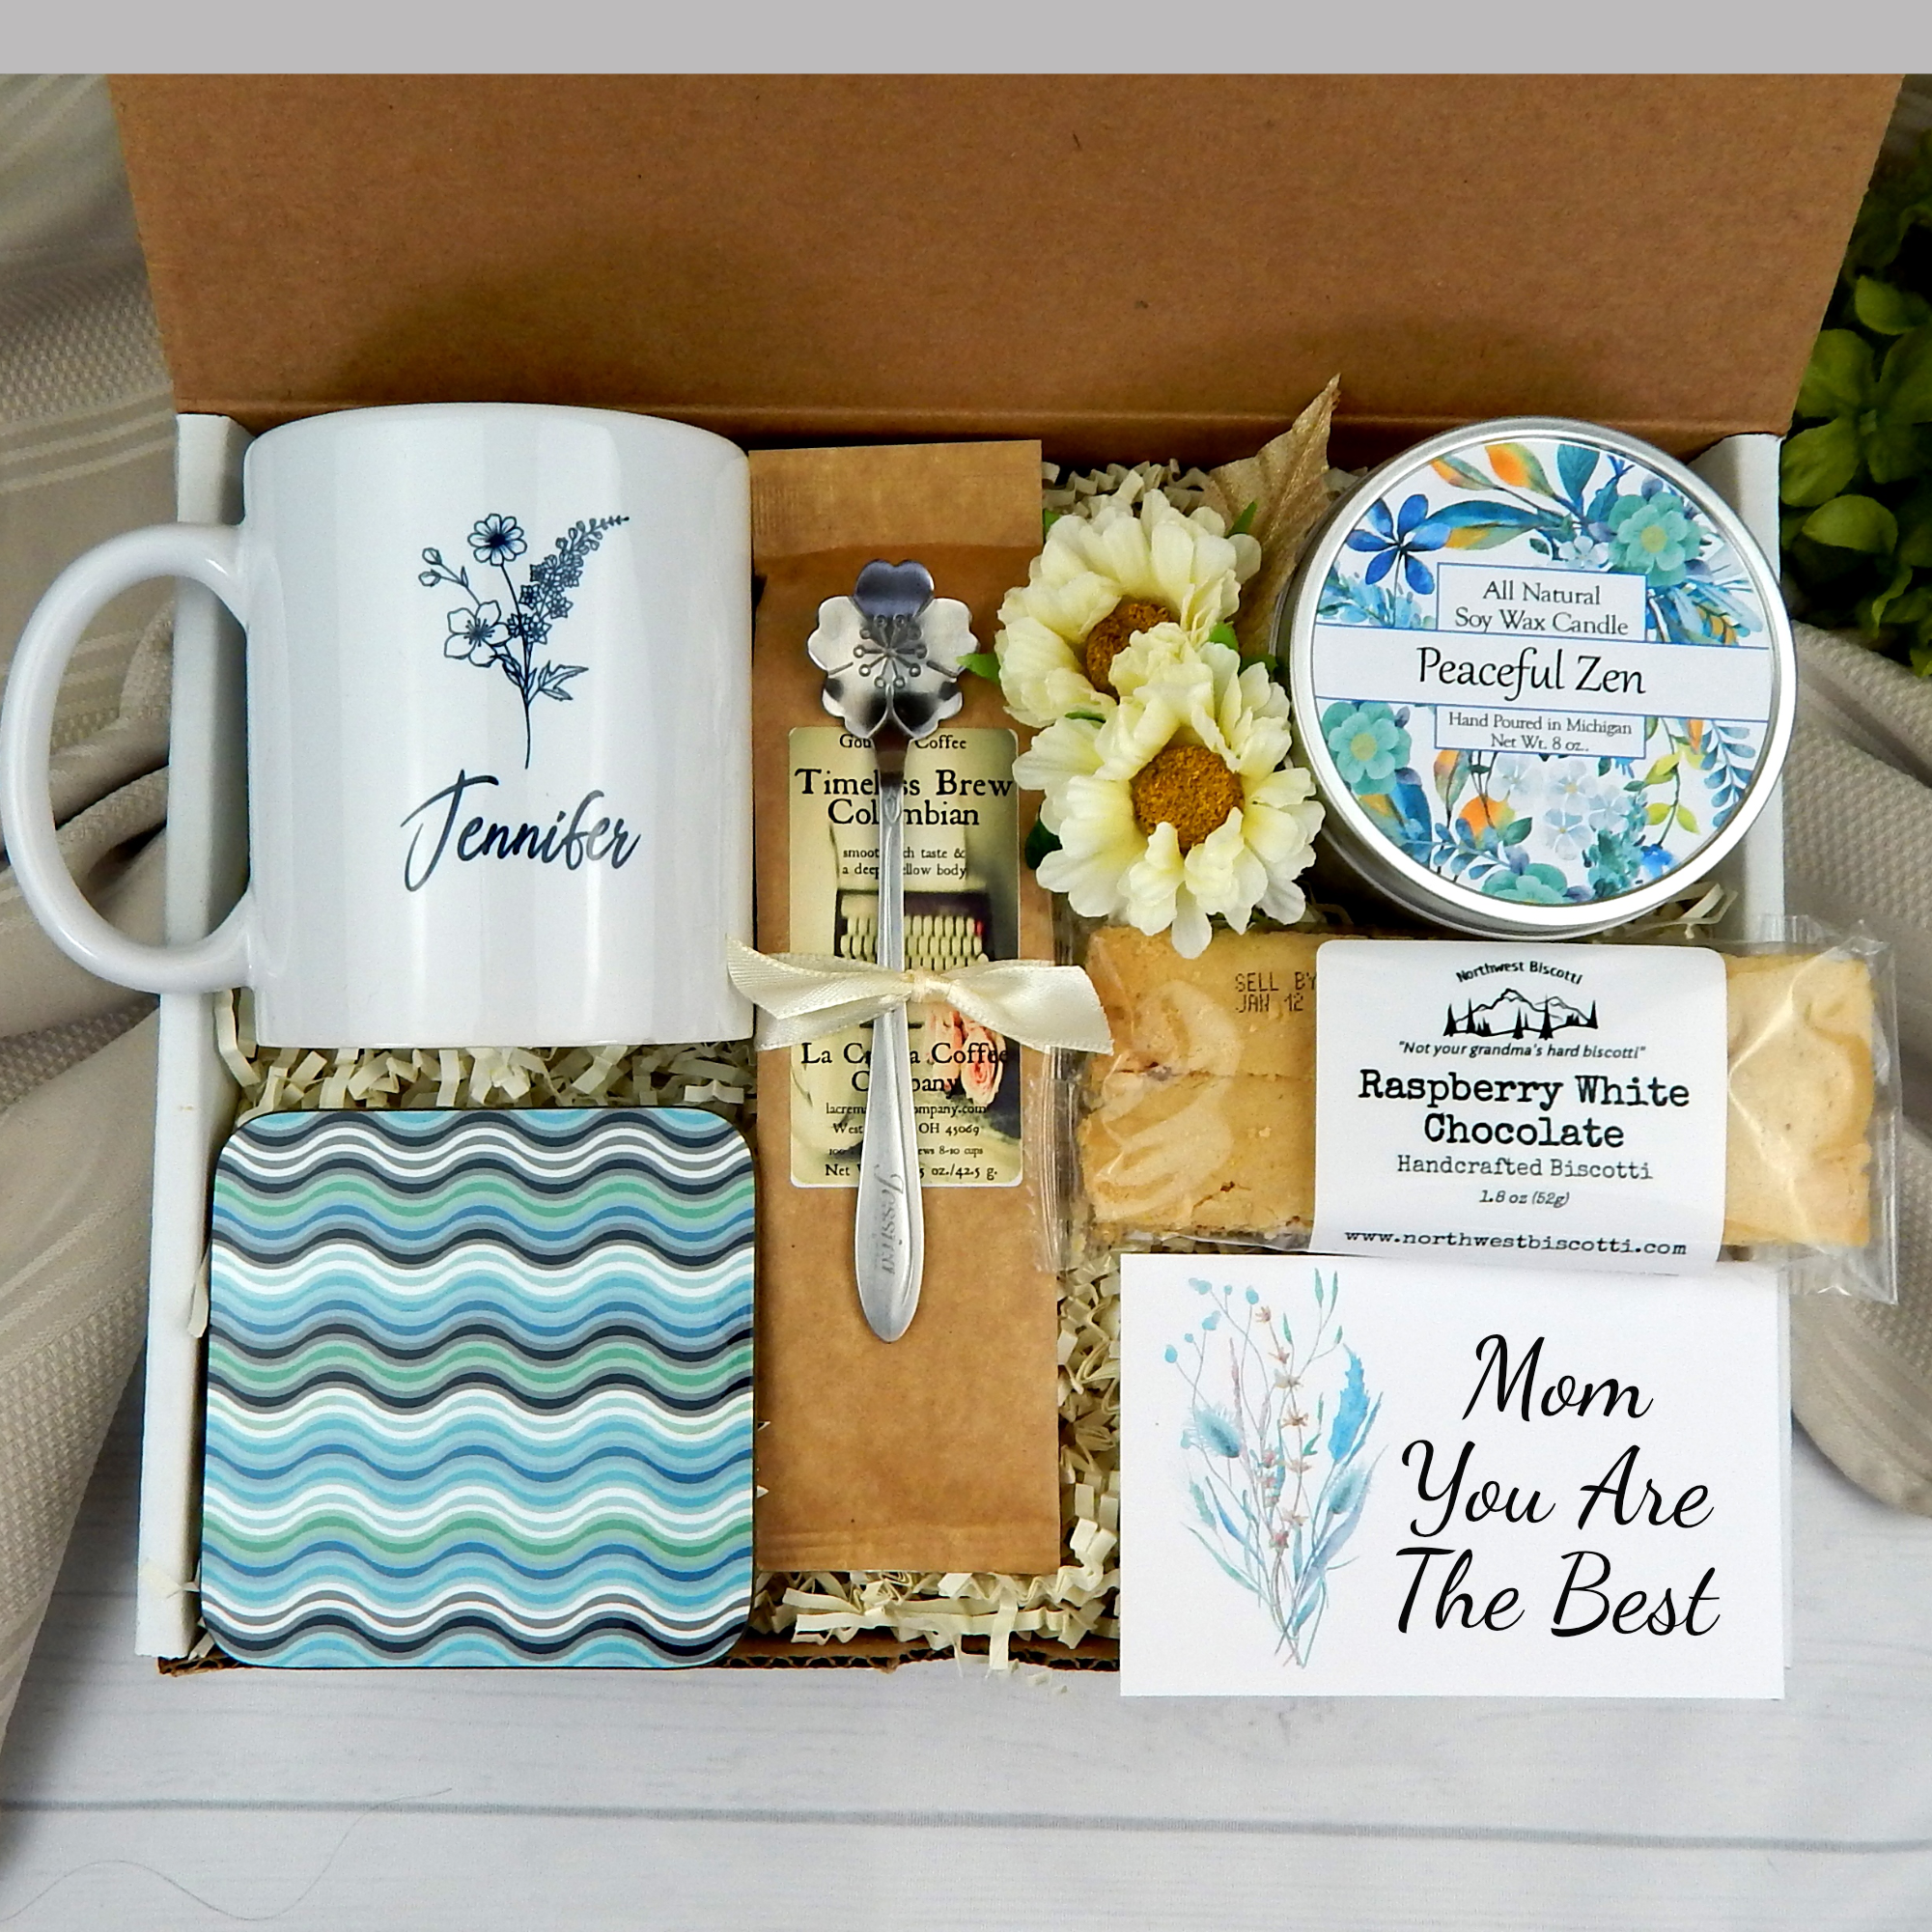 Buddy Brew Coffee Gift Set For Two | WPROMO - Event gift ideas in Waco,  Texas United States